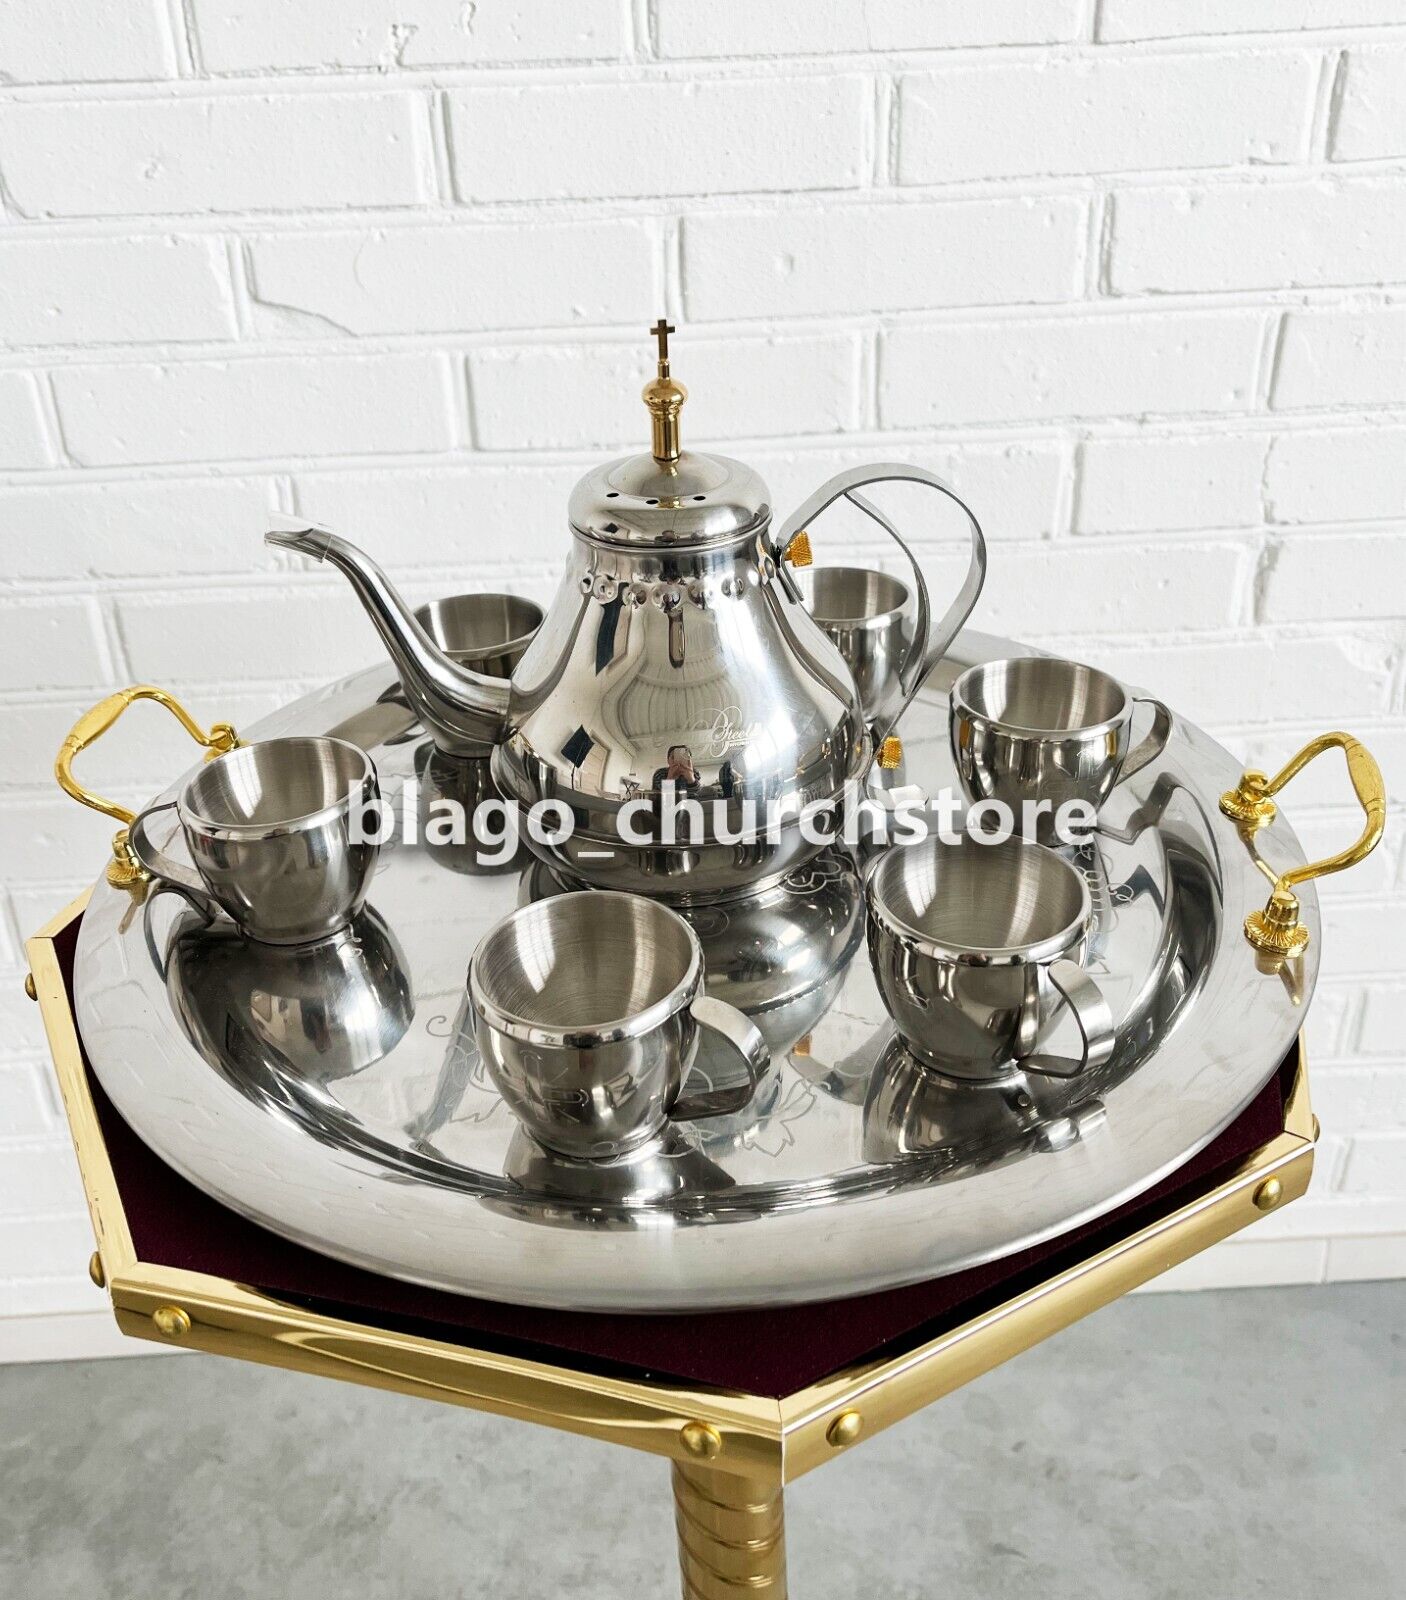 Church Drinking Set 6 zeon cup plate teapot stainless steel 15.74